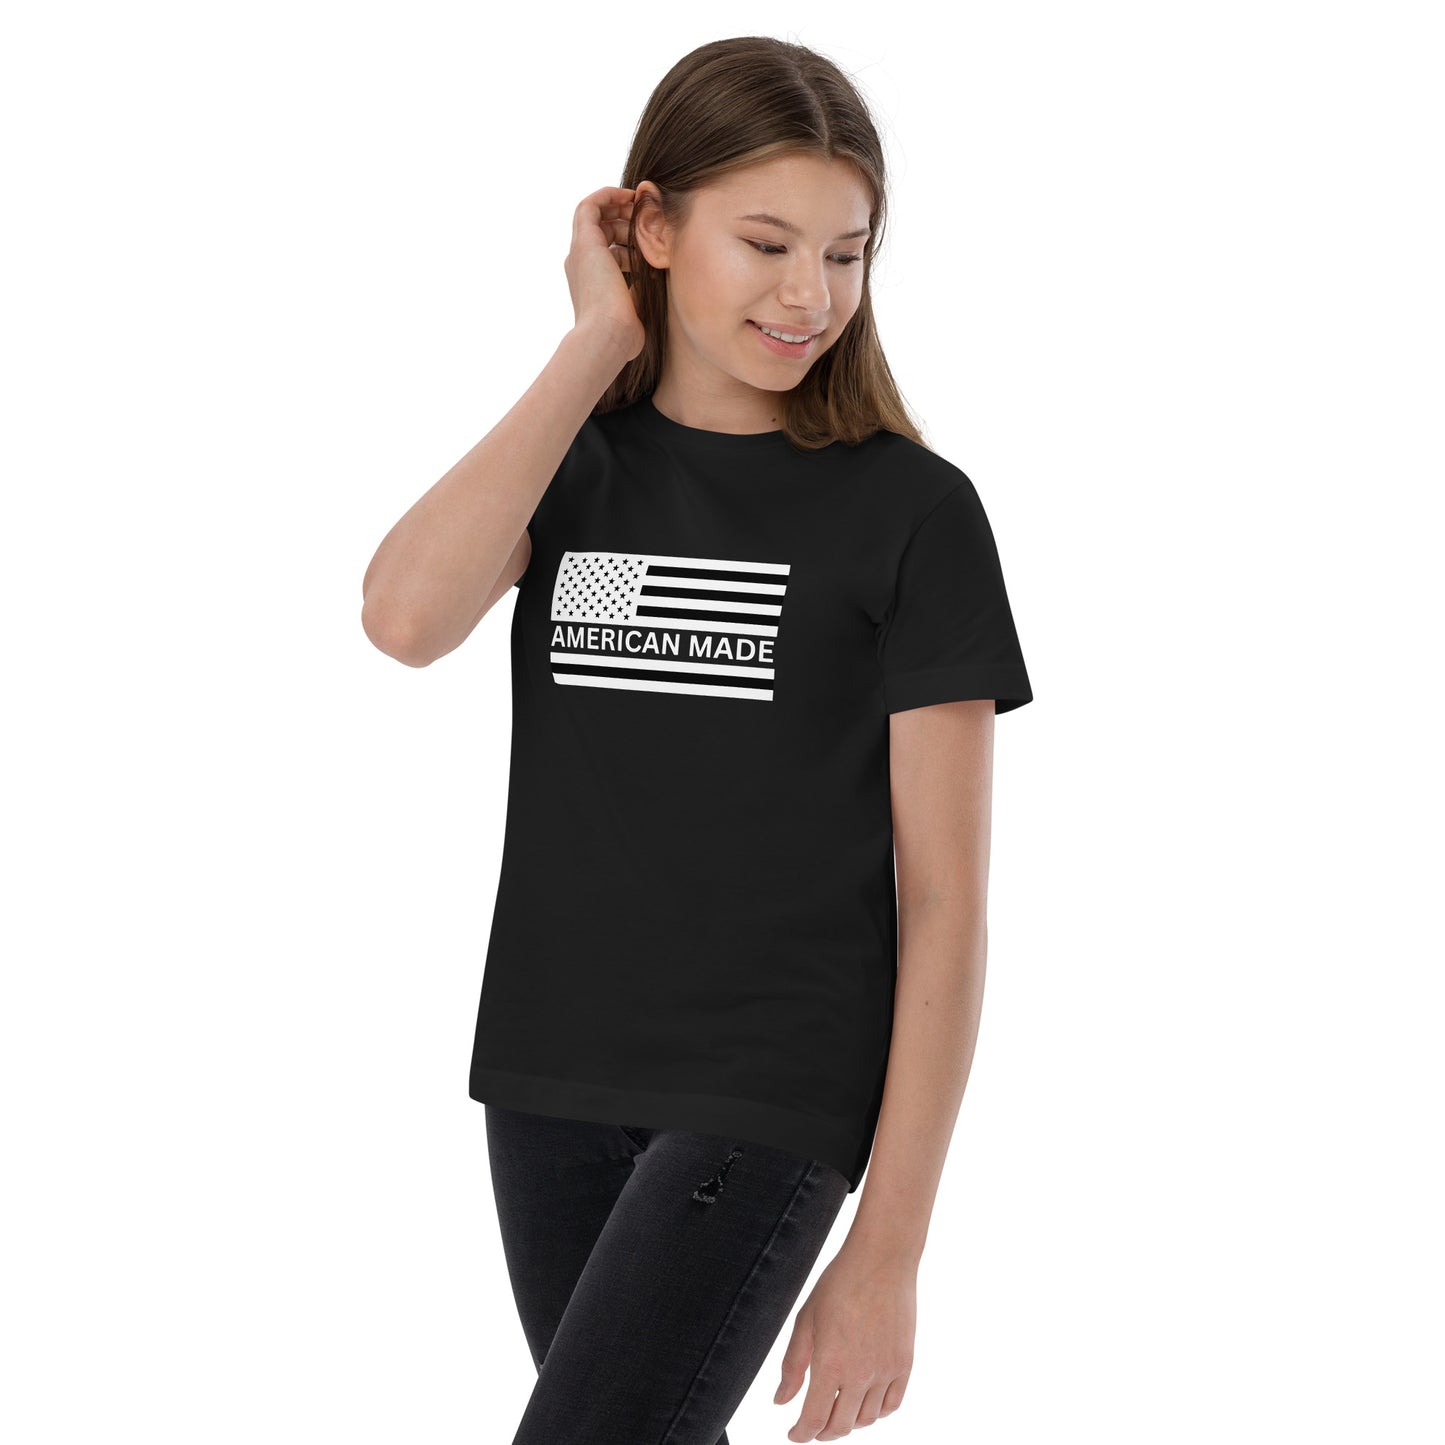 Let your young patriots show their love for America with our American Made Youth UNCIVIL Tee. This tee features a bold American flag graphic that will showcase your child's patriotism and support for American values.